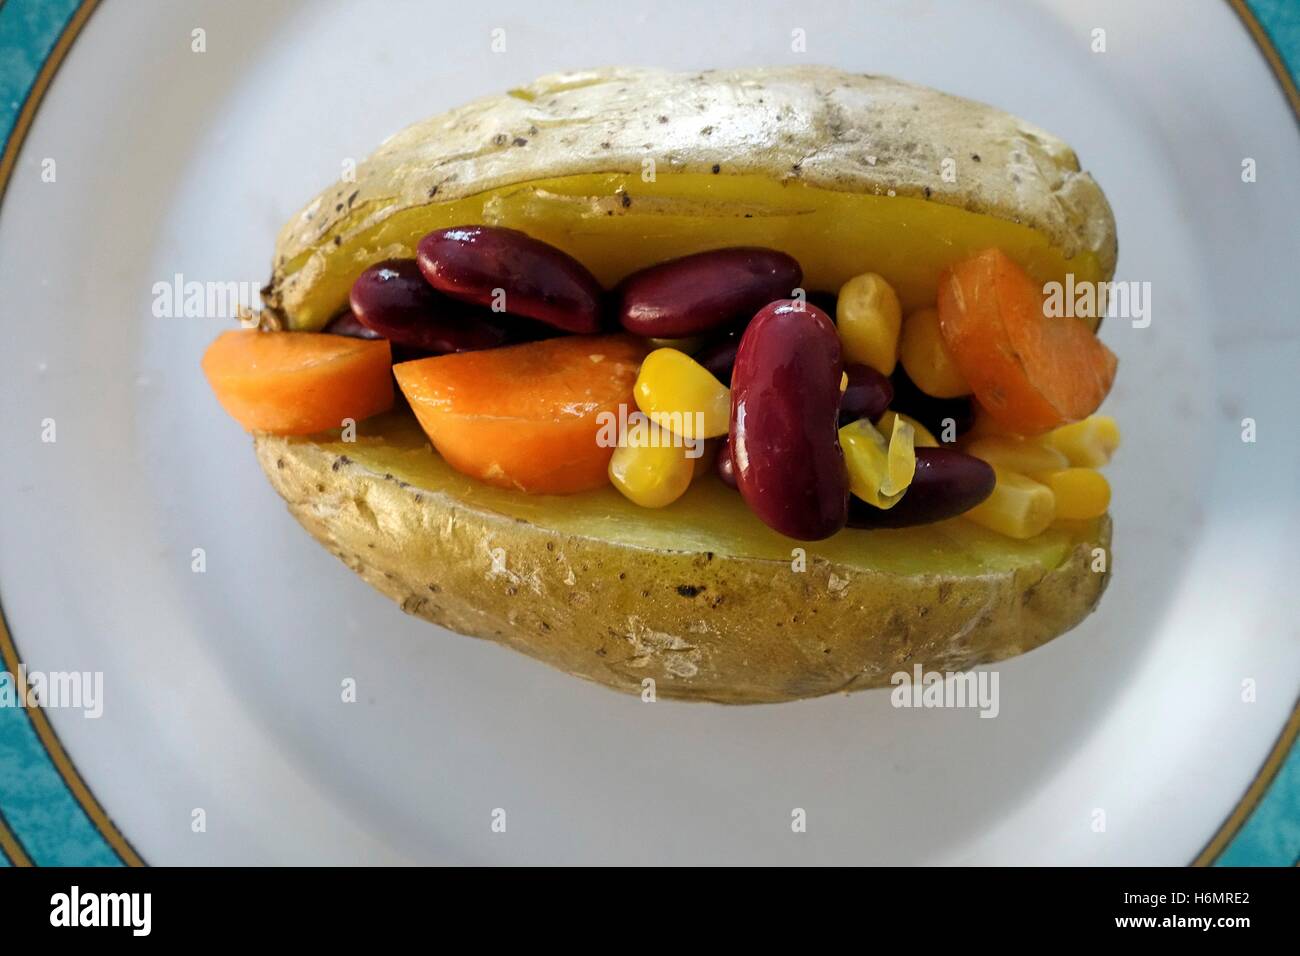 Jacket Potato with Red Kidney Beans, Carrot and Sweetcorn Stock Photo